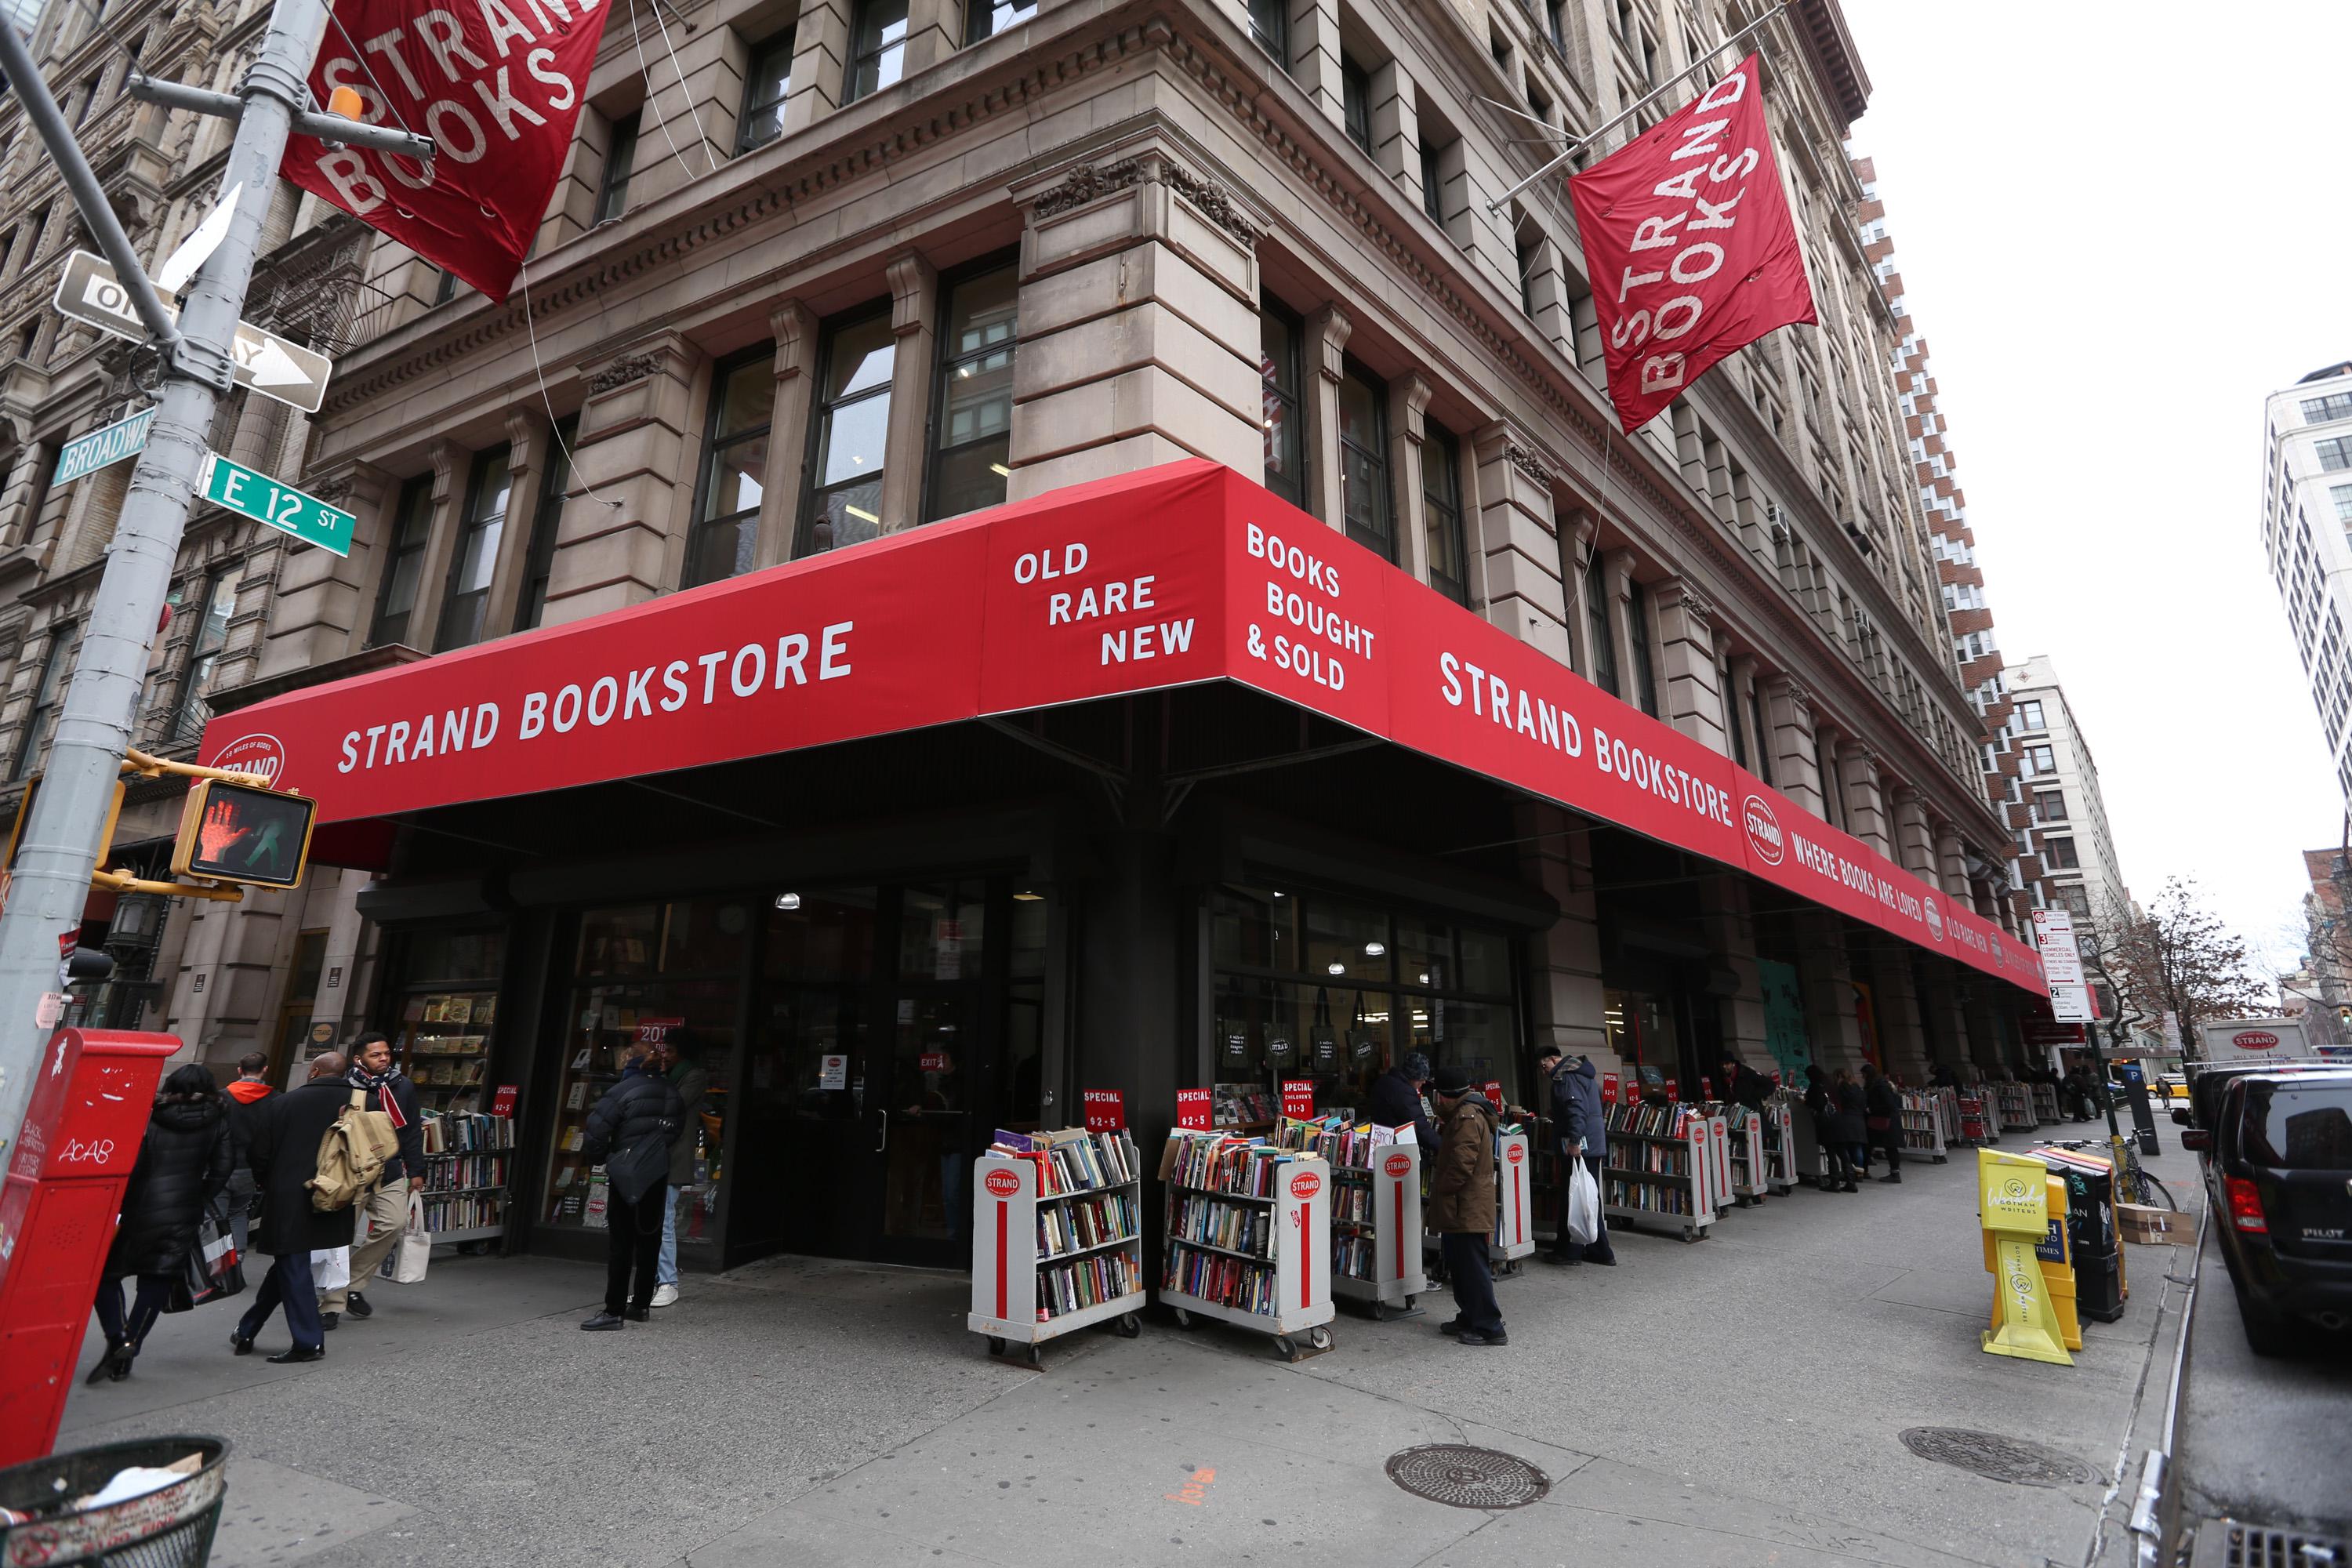 NEW YORK, NY - JANUARY 12:  A view of Strand Bookstore on January 12, 2016 in New York, United States. Strand was one of the favorite places rock legend David Bowie would go to regularly as a New Yorker. He passed away on Sunday, January 10th at the age of 69 after an 18 month battle with cancer.  (Photo by Rob Kim/Getty Images)